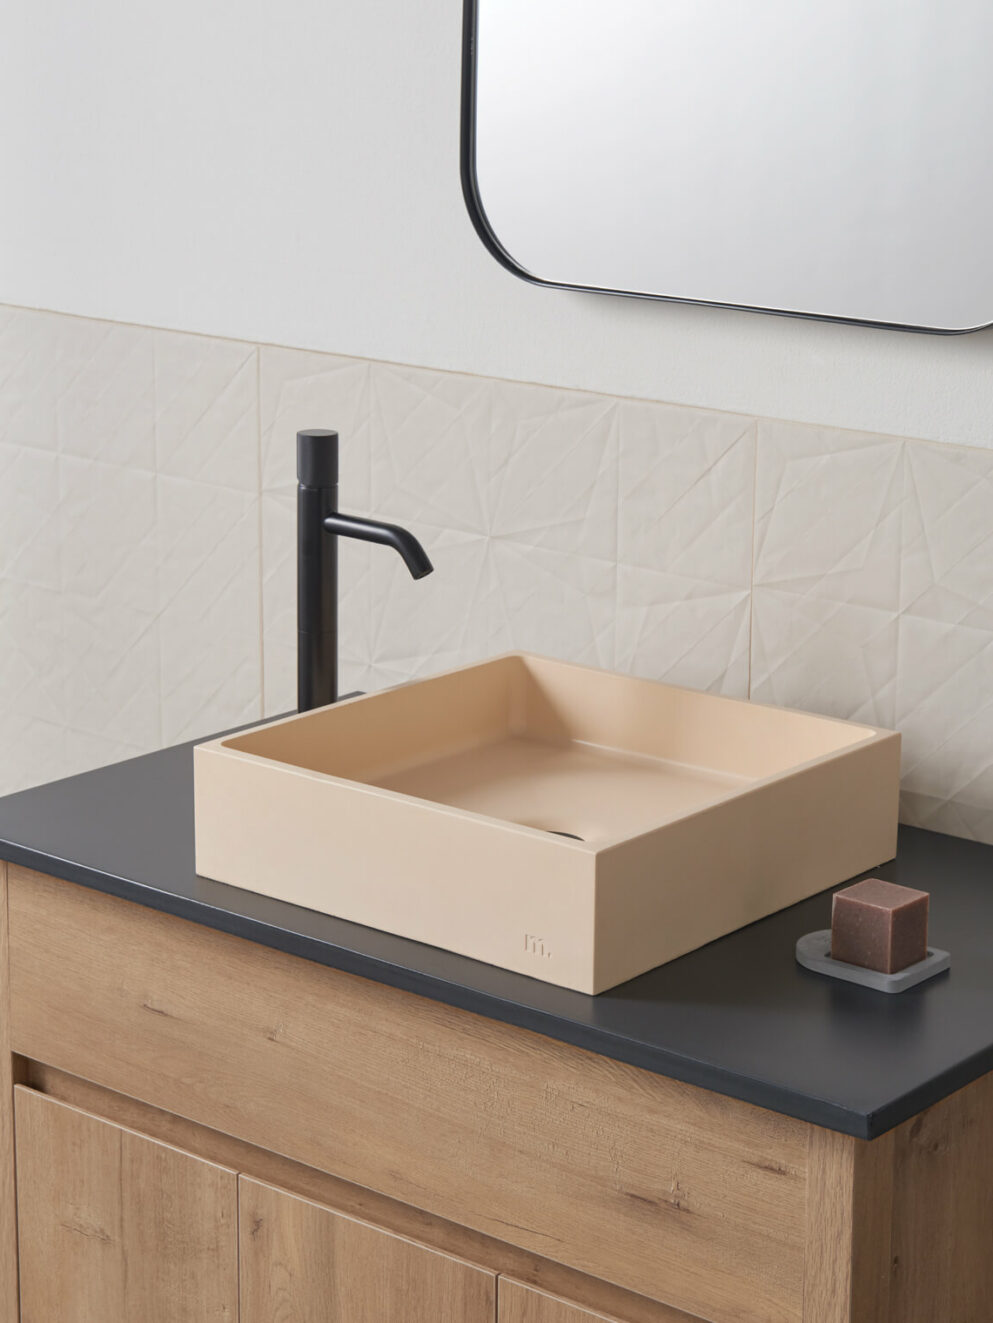 mudd concrete Yarra LG in the colour peach in a modern light bathroom setting with black hardware